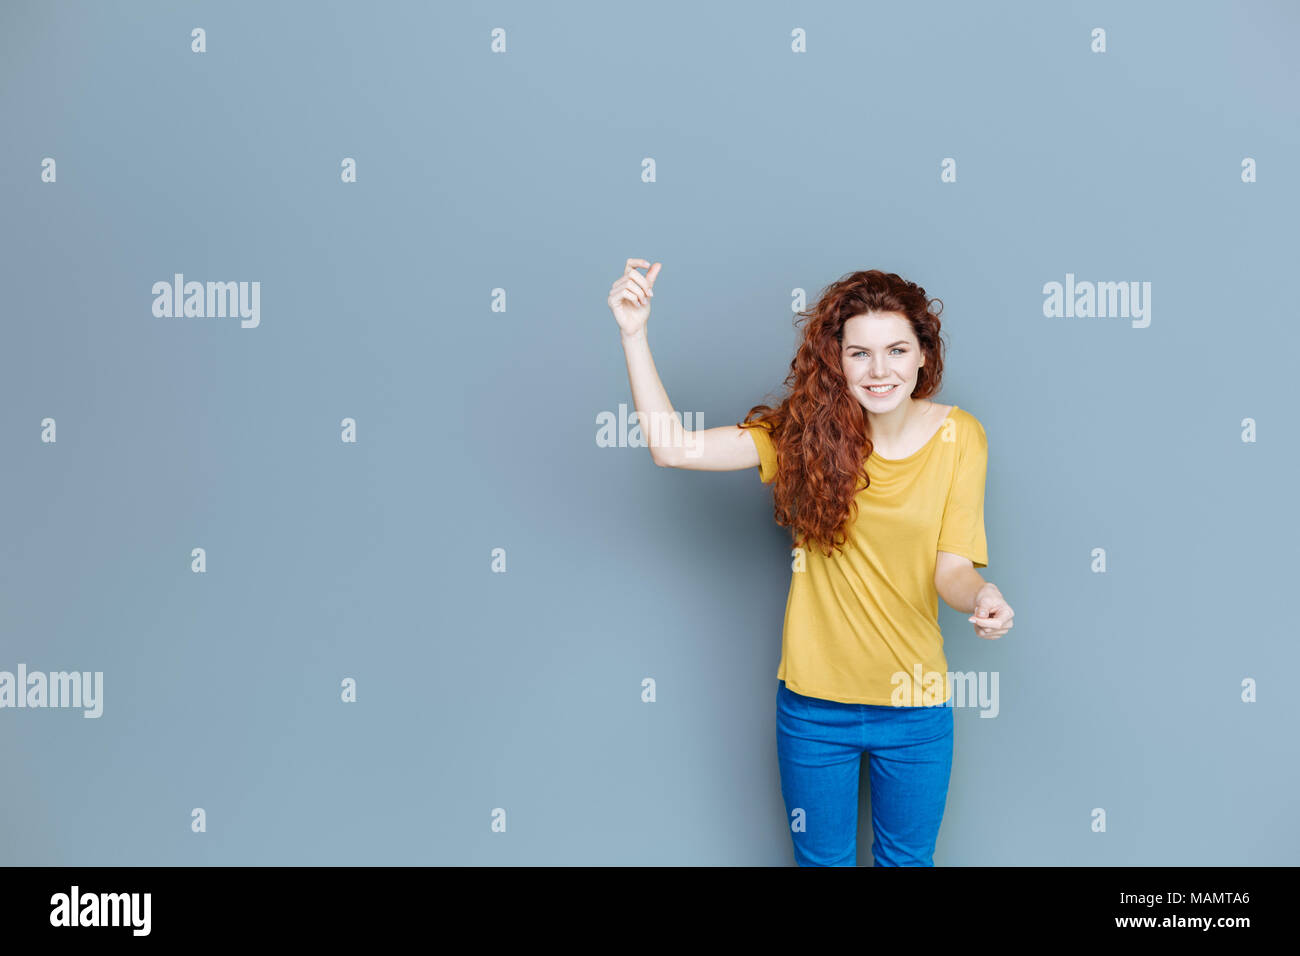 Delighted nice woman holding her hand up Stock Photo